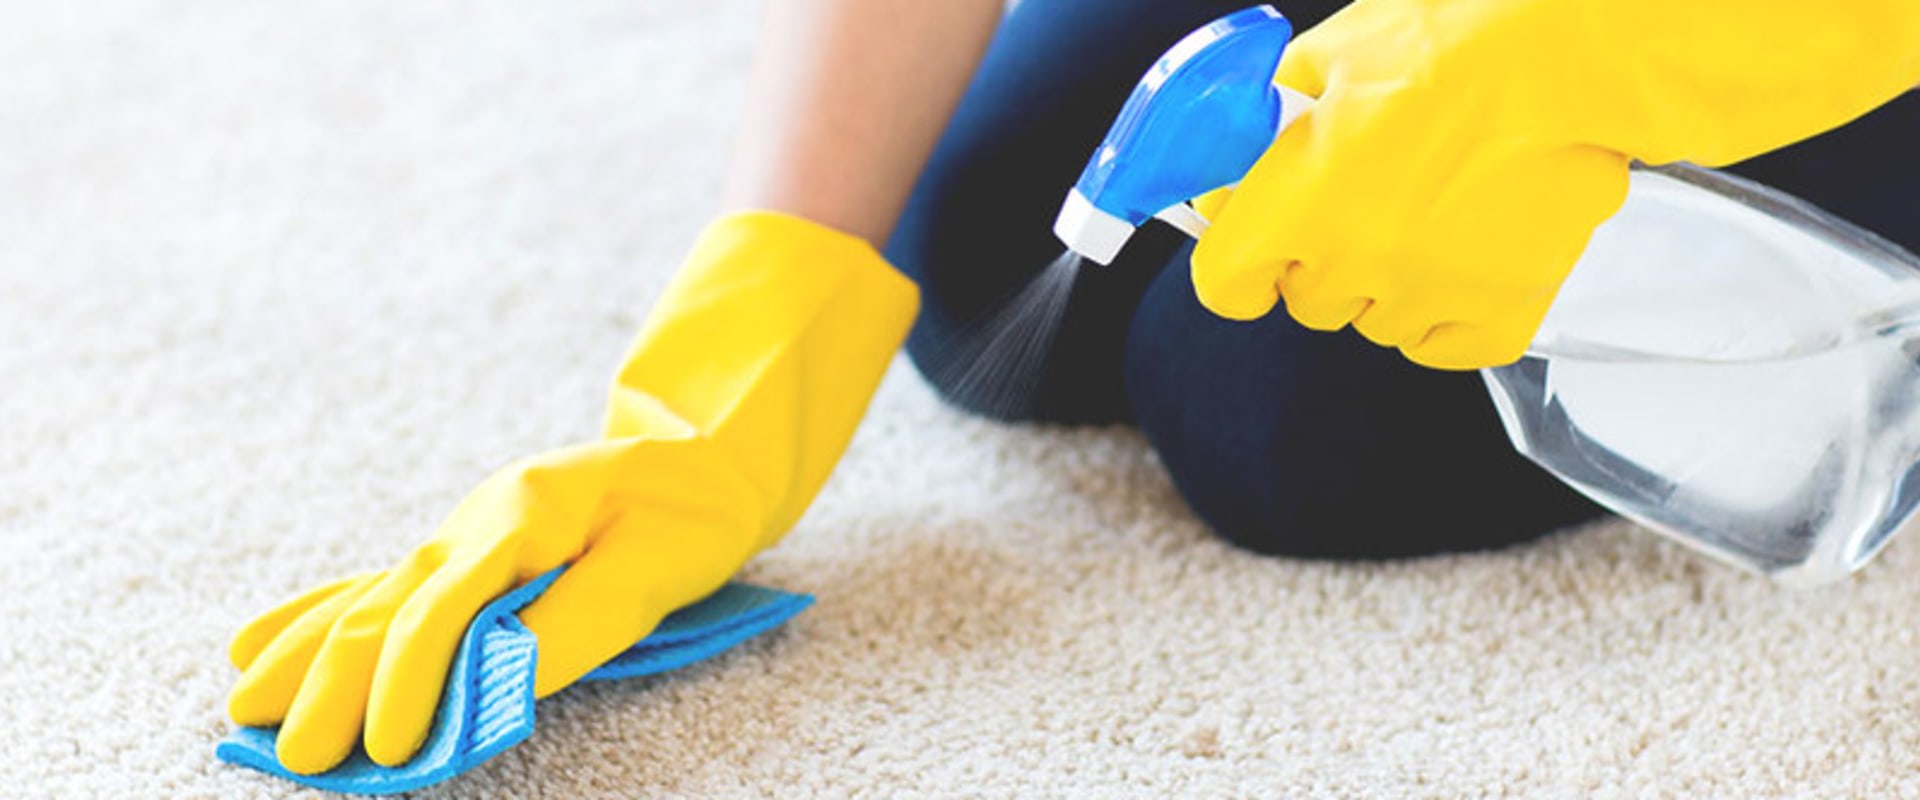 Beyond The Basics: Elevating Home Cleanliness With Post-Maid Service Carpet Cleaning In Marietta, GA